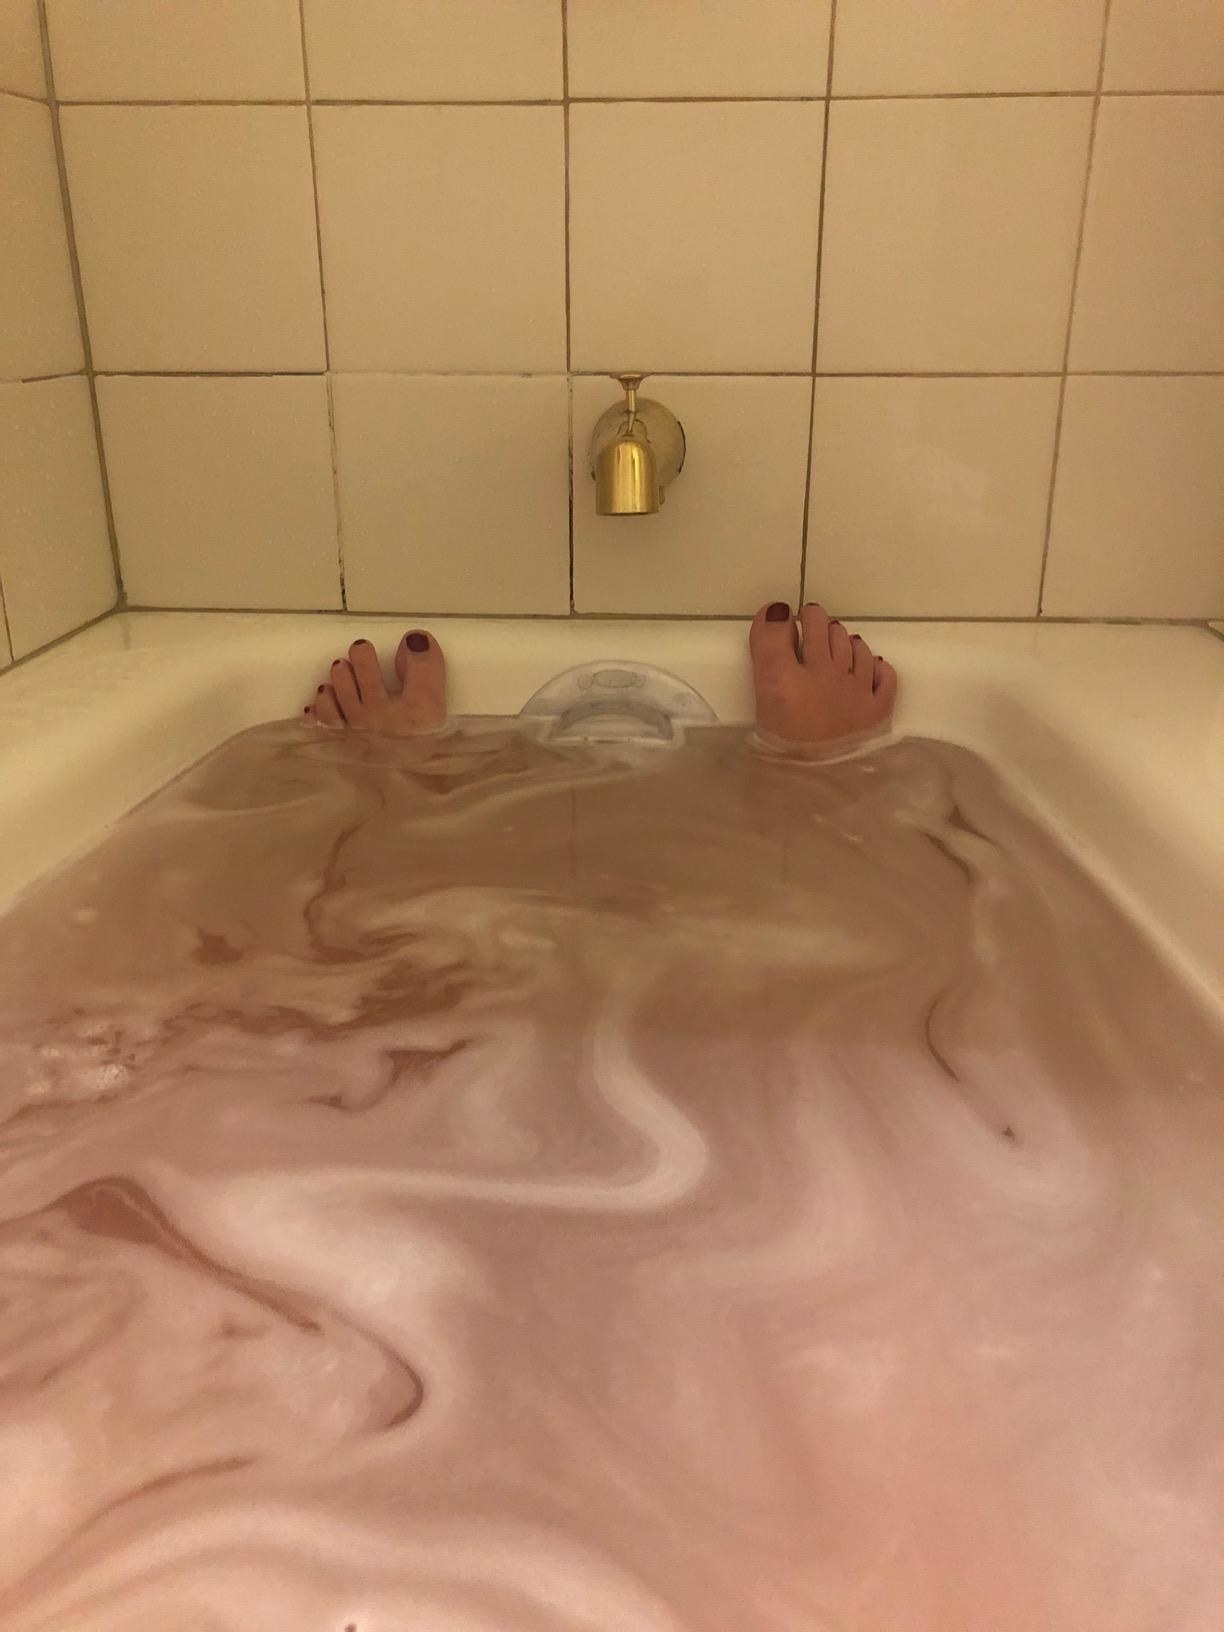 reviewer sits in full tub